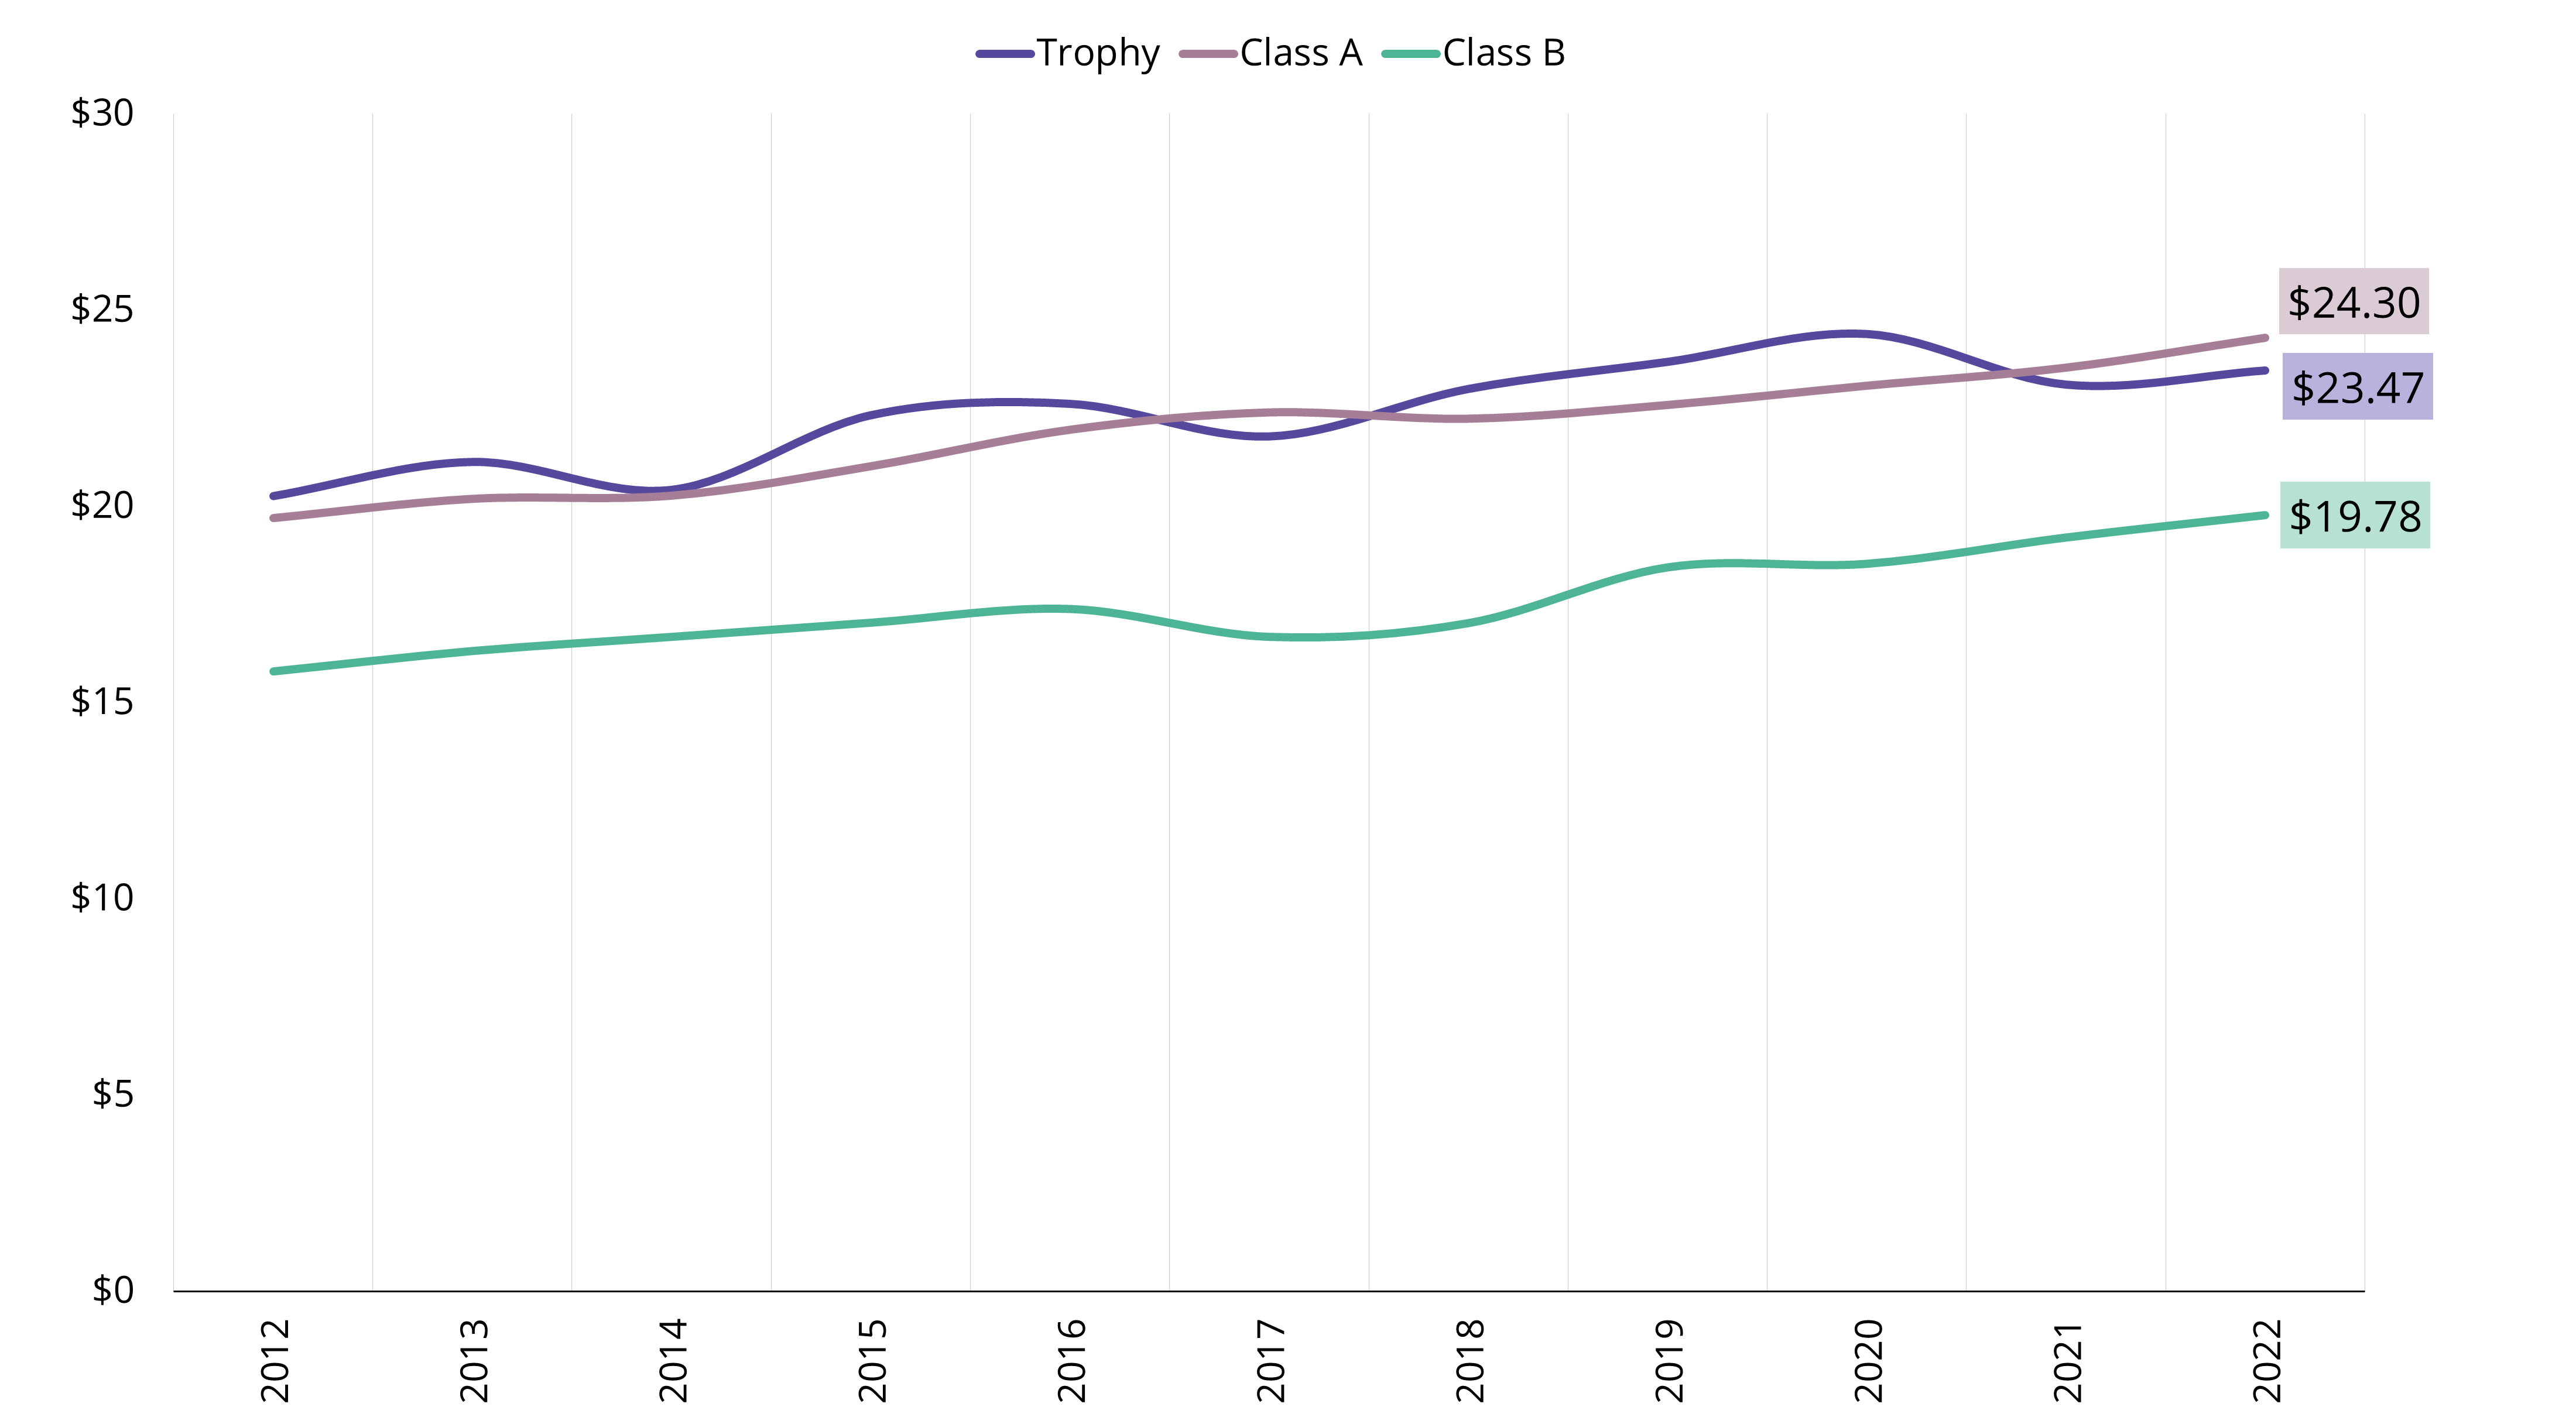 graph showing office asking rates increasing over time from 2012 to 2022 in Jacksonville, Florida due to tenant demand in the financial sector